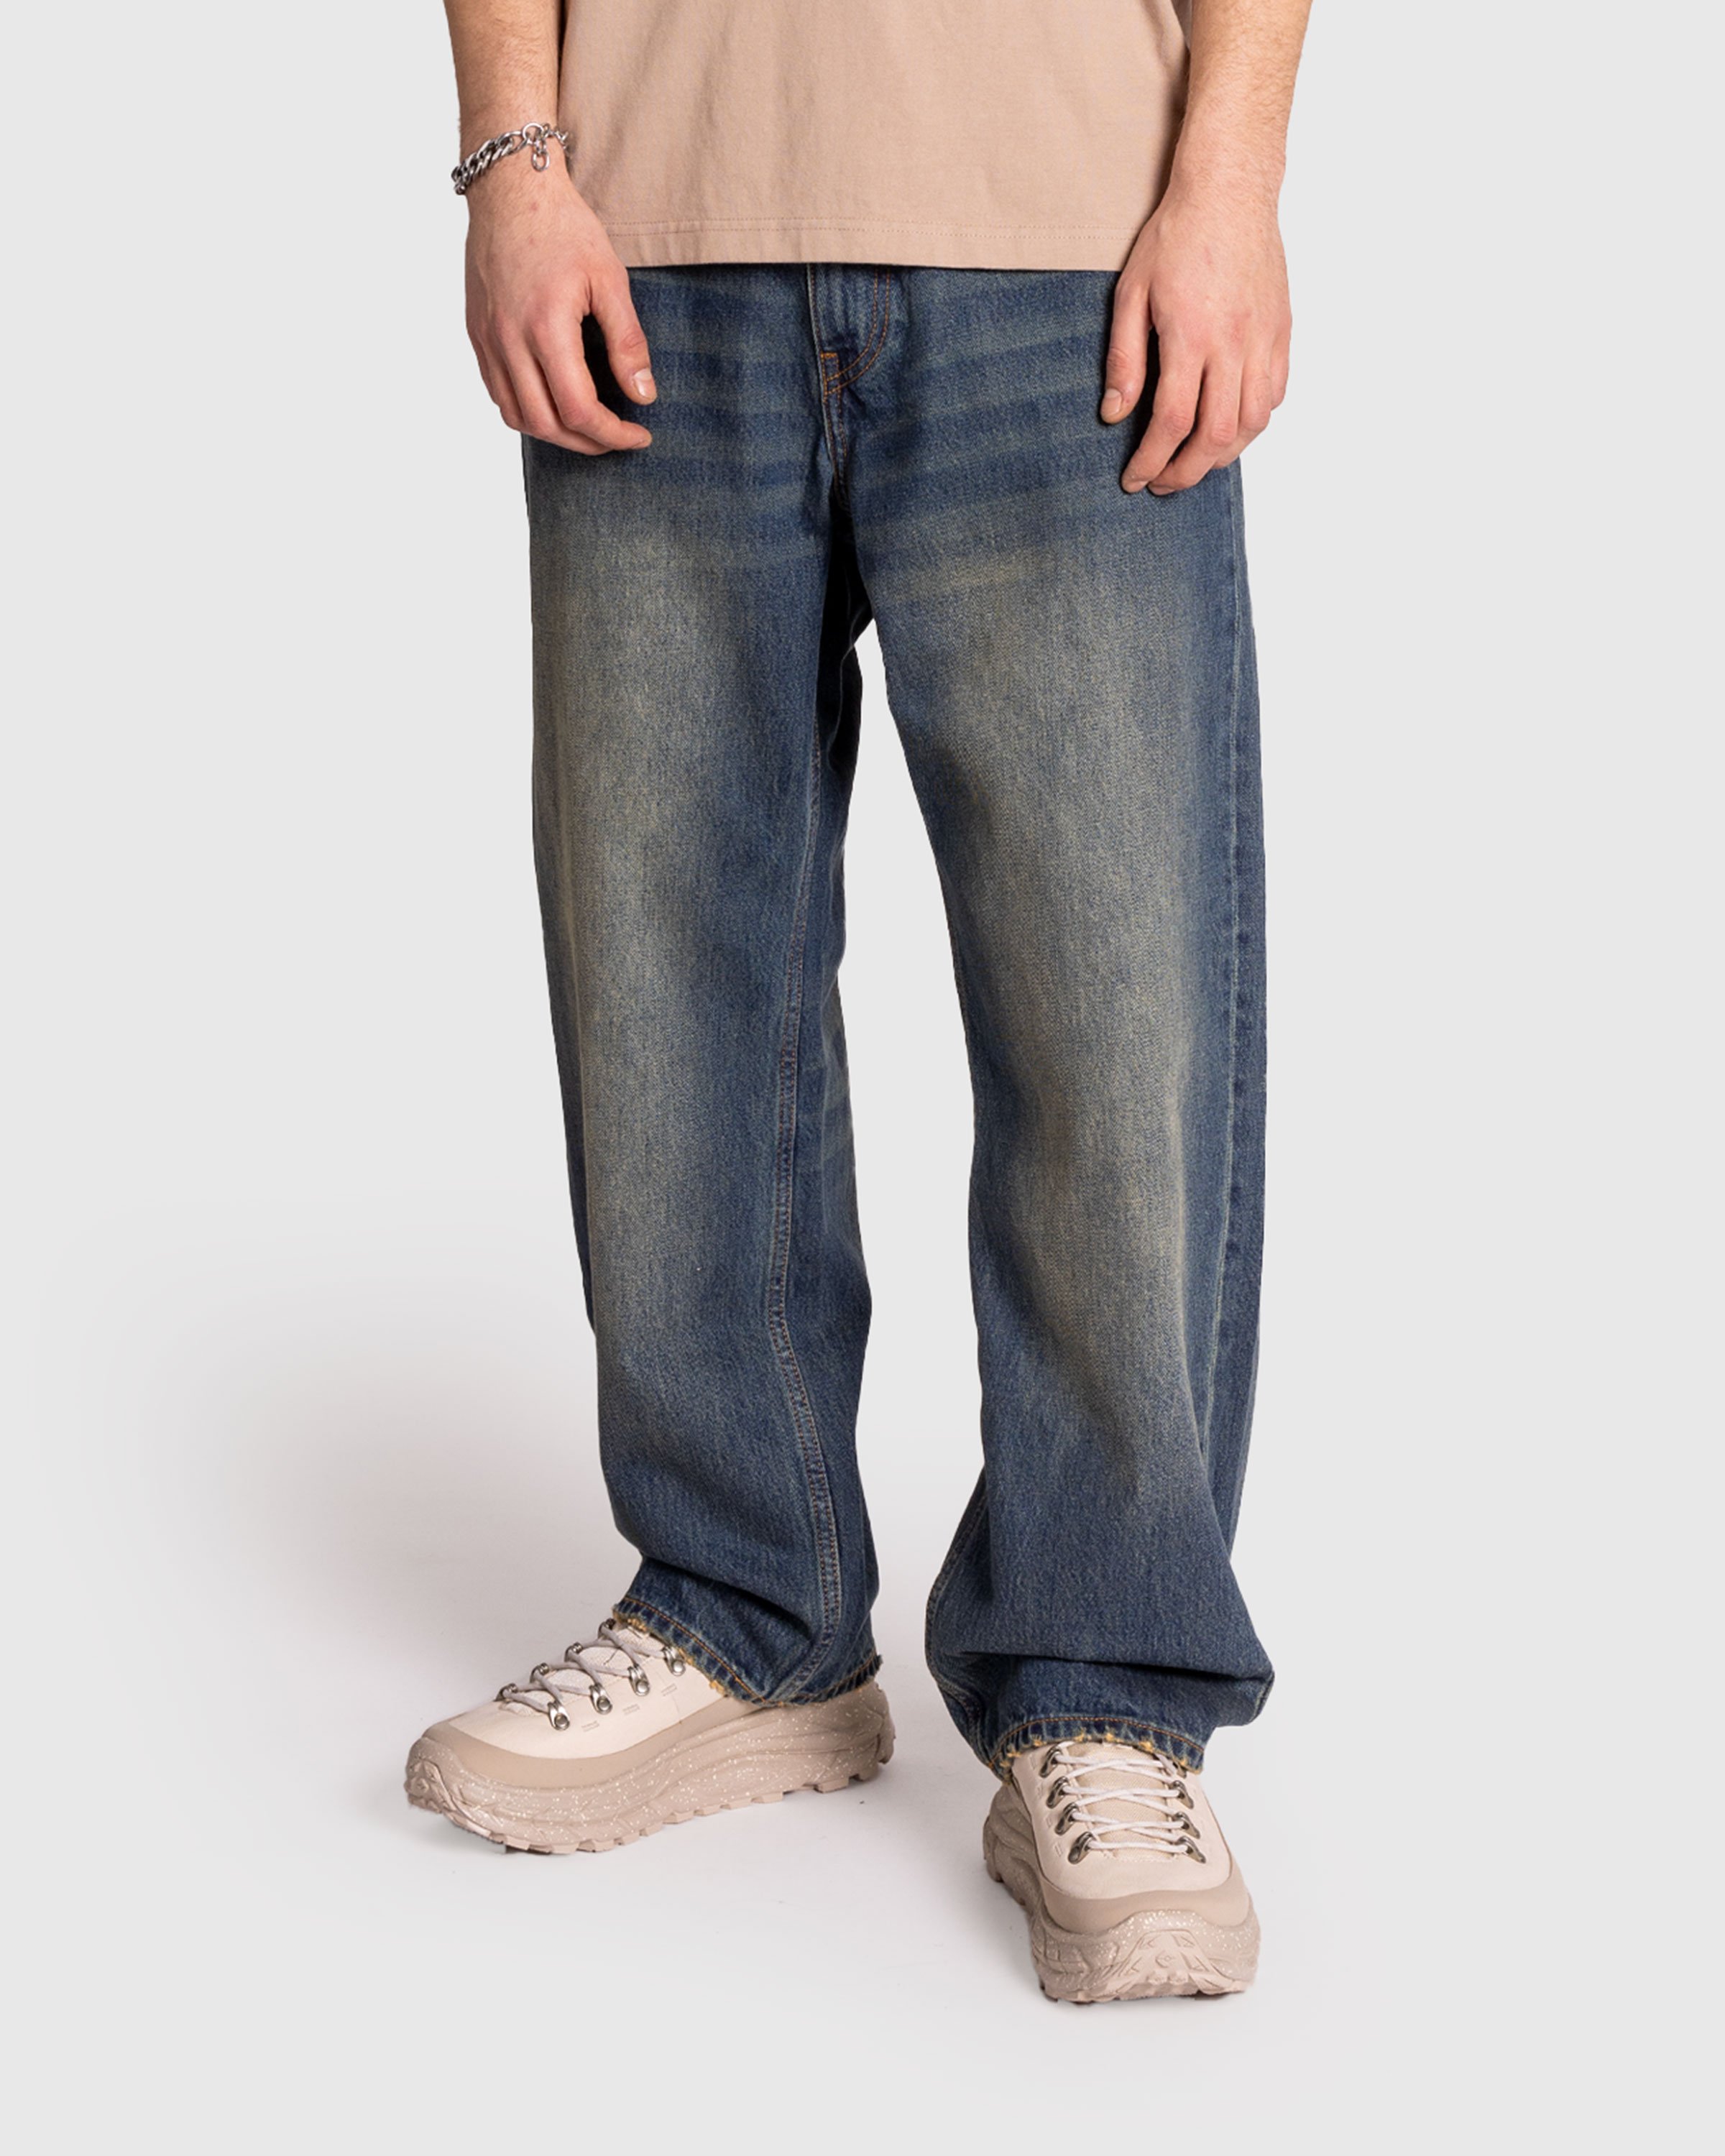 Patta - Whiskers Jeans Vintage Blue - Clothing - Blue - Image 2